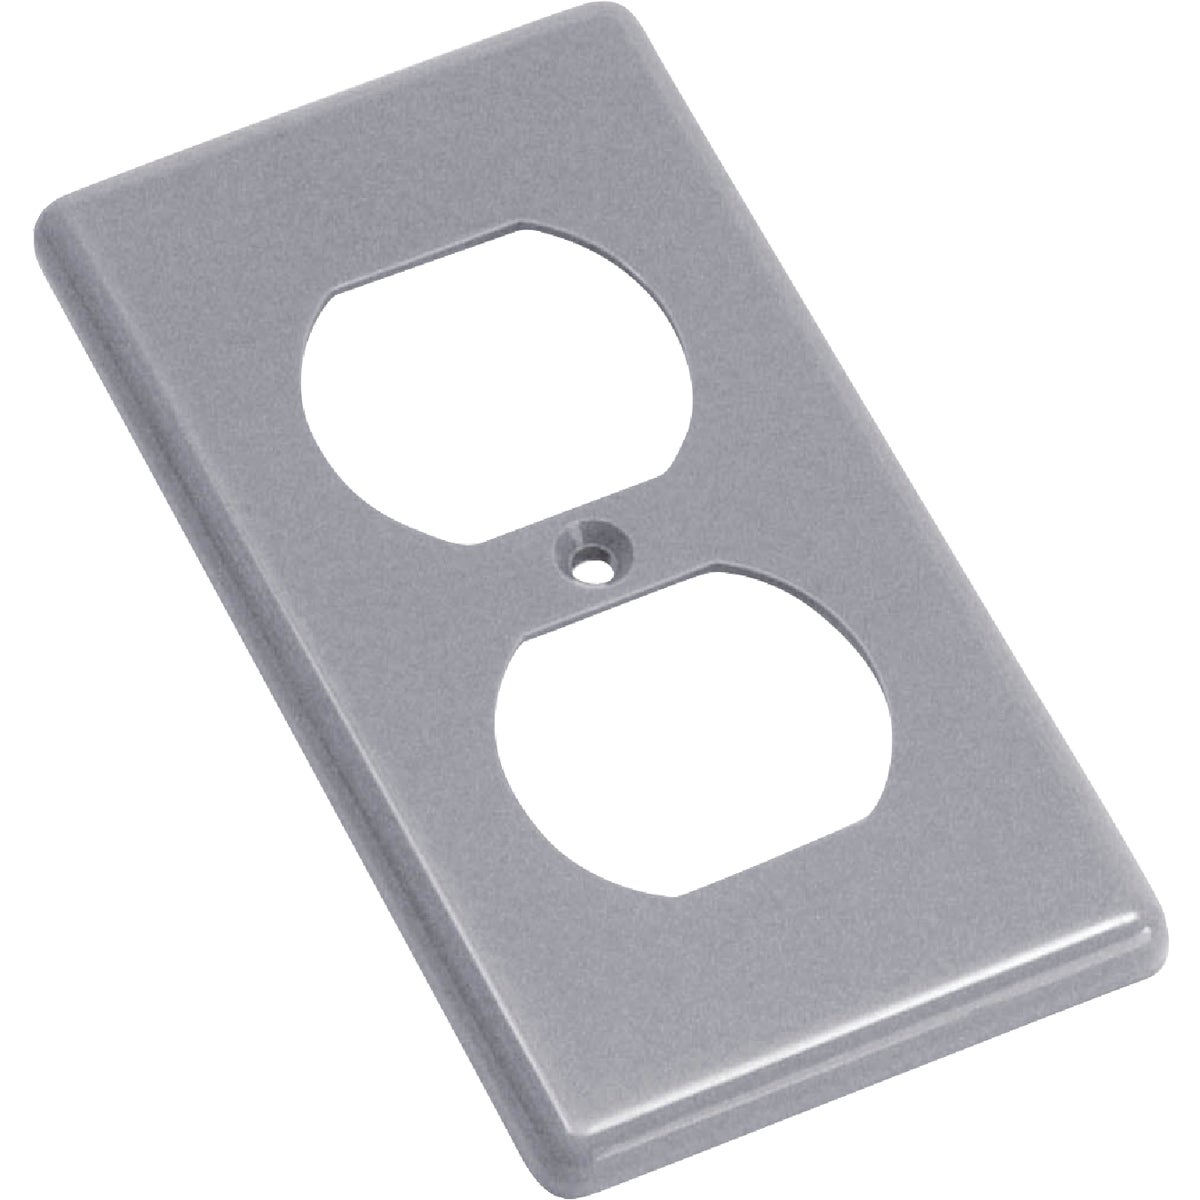 Item 531863, Gray PVC duplex outlet handy box cover. 2-5/16 In. W. x 4-1/4 In. H.